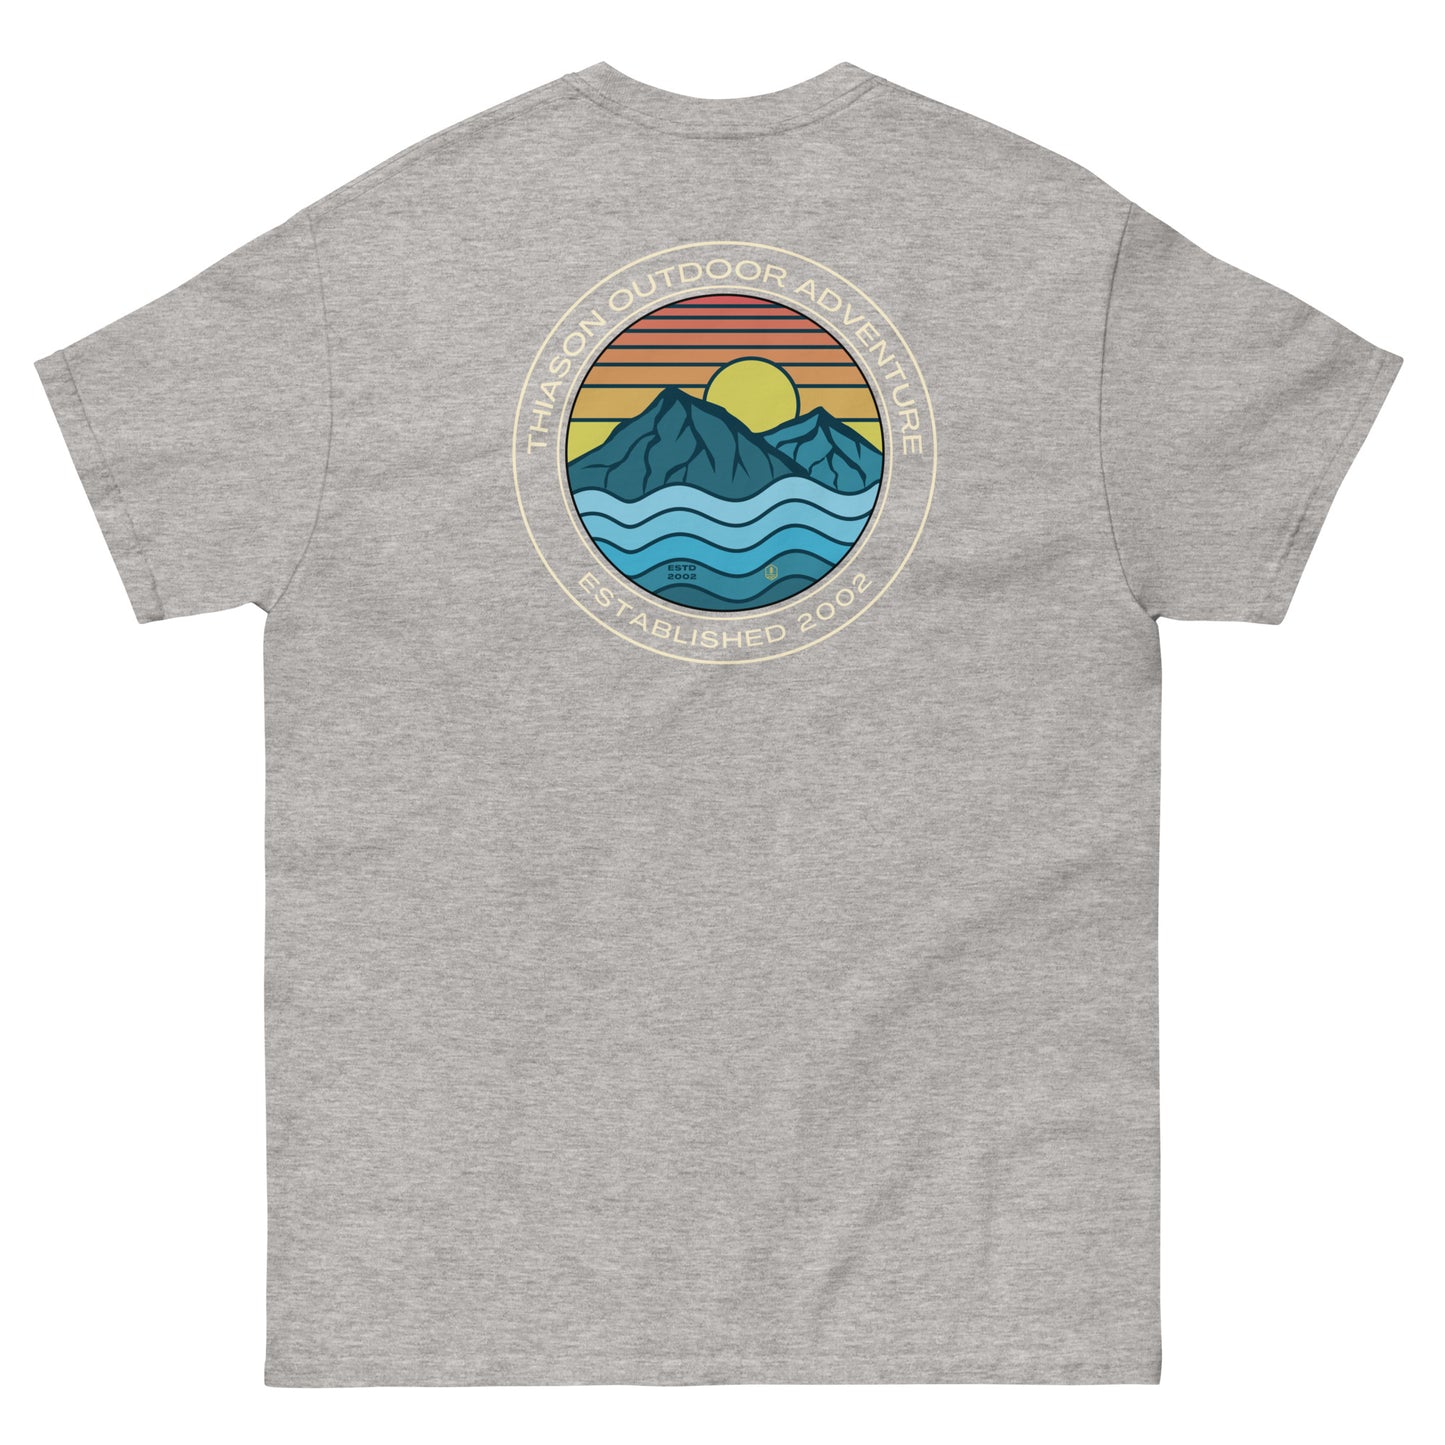 SUNSET IN THE MOUNTAINS Men's classic tee